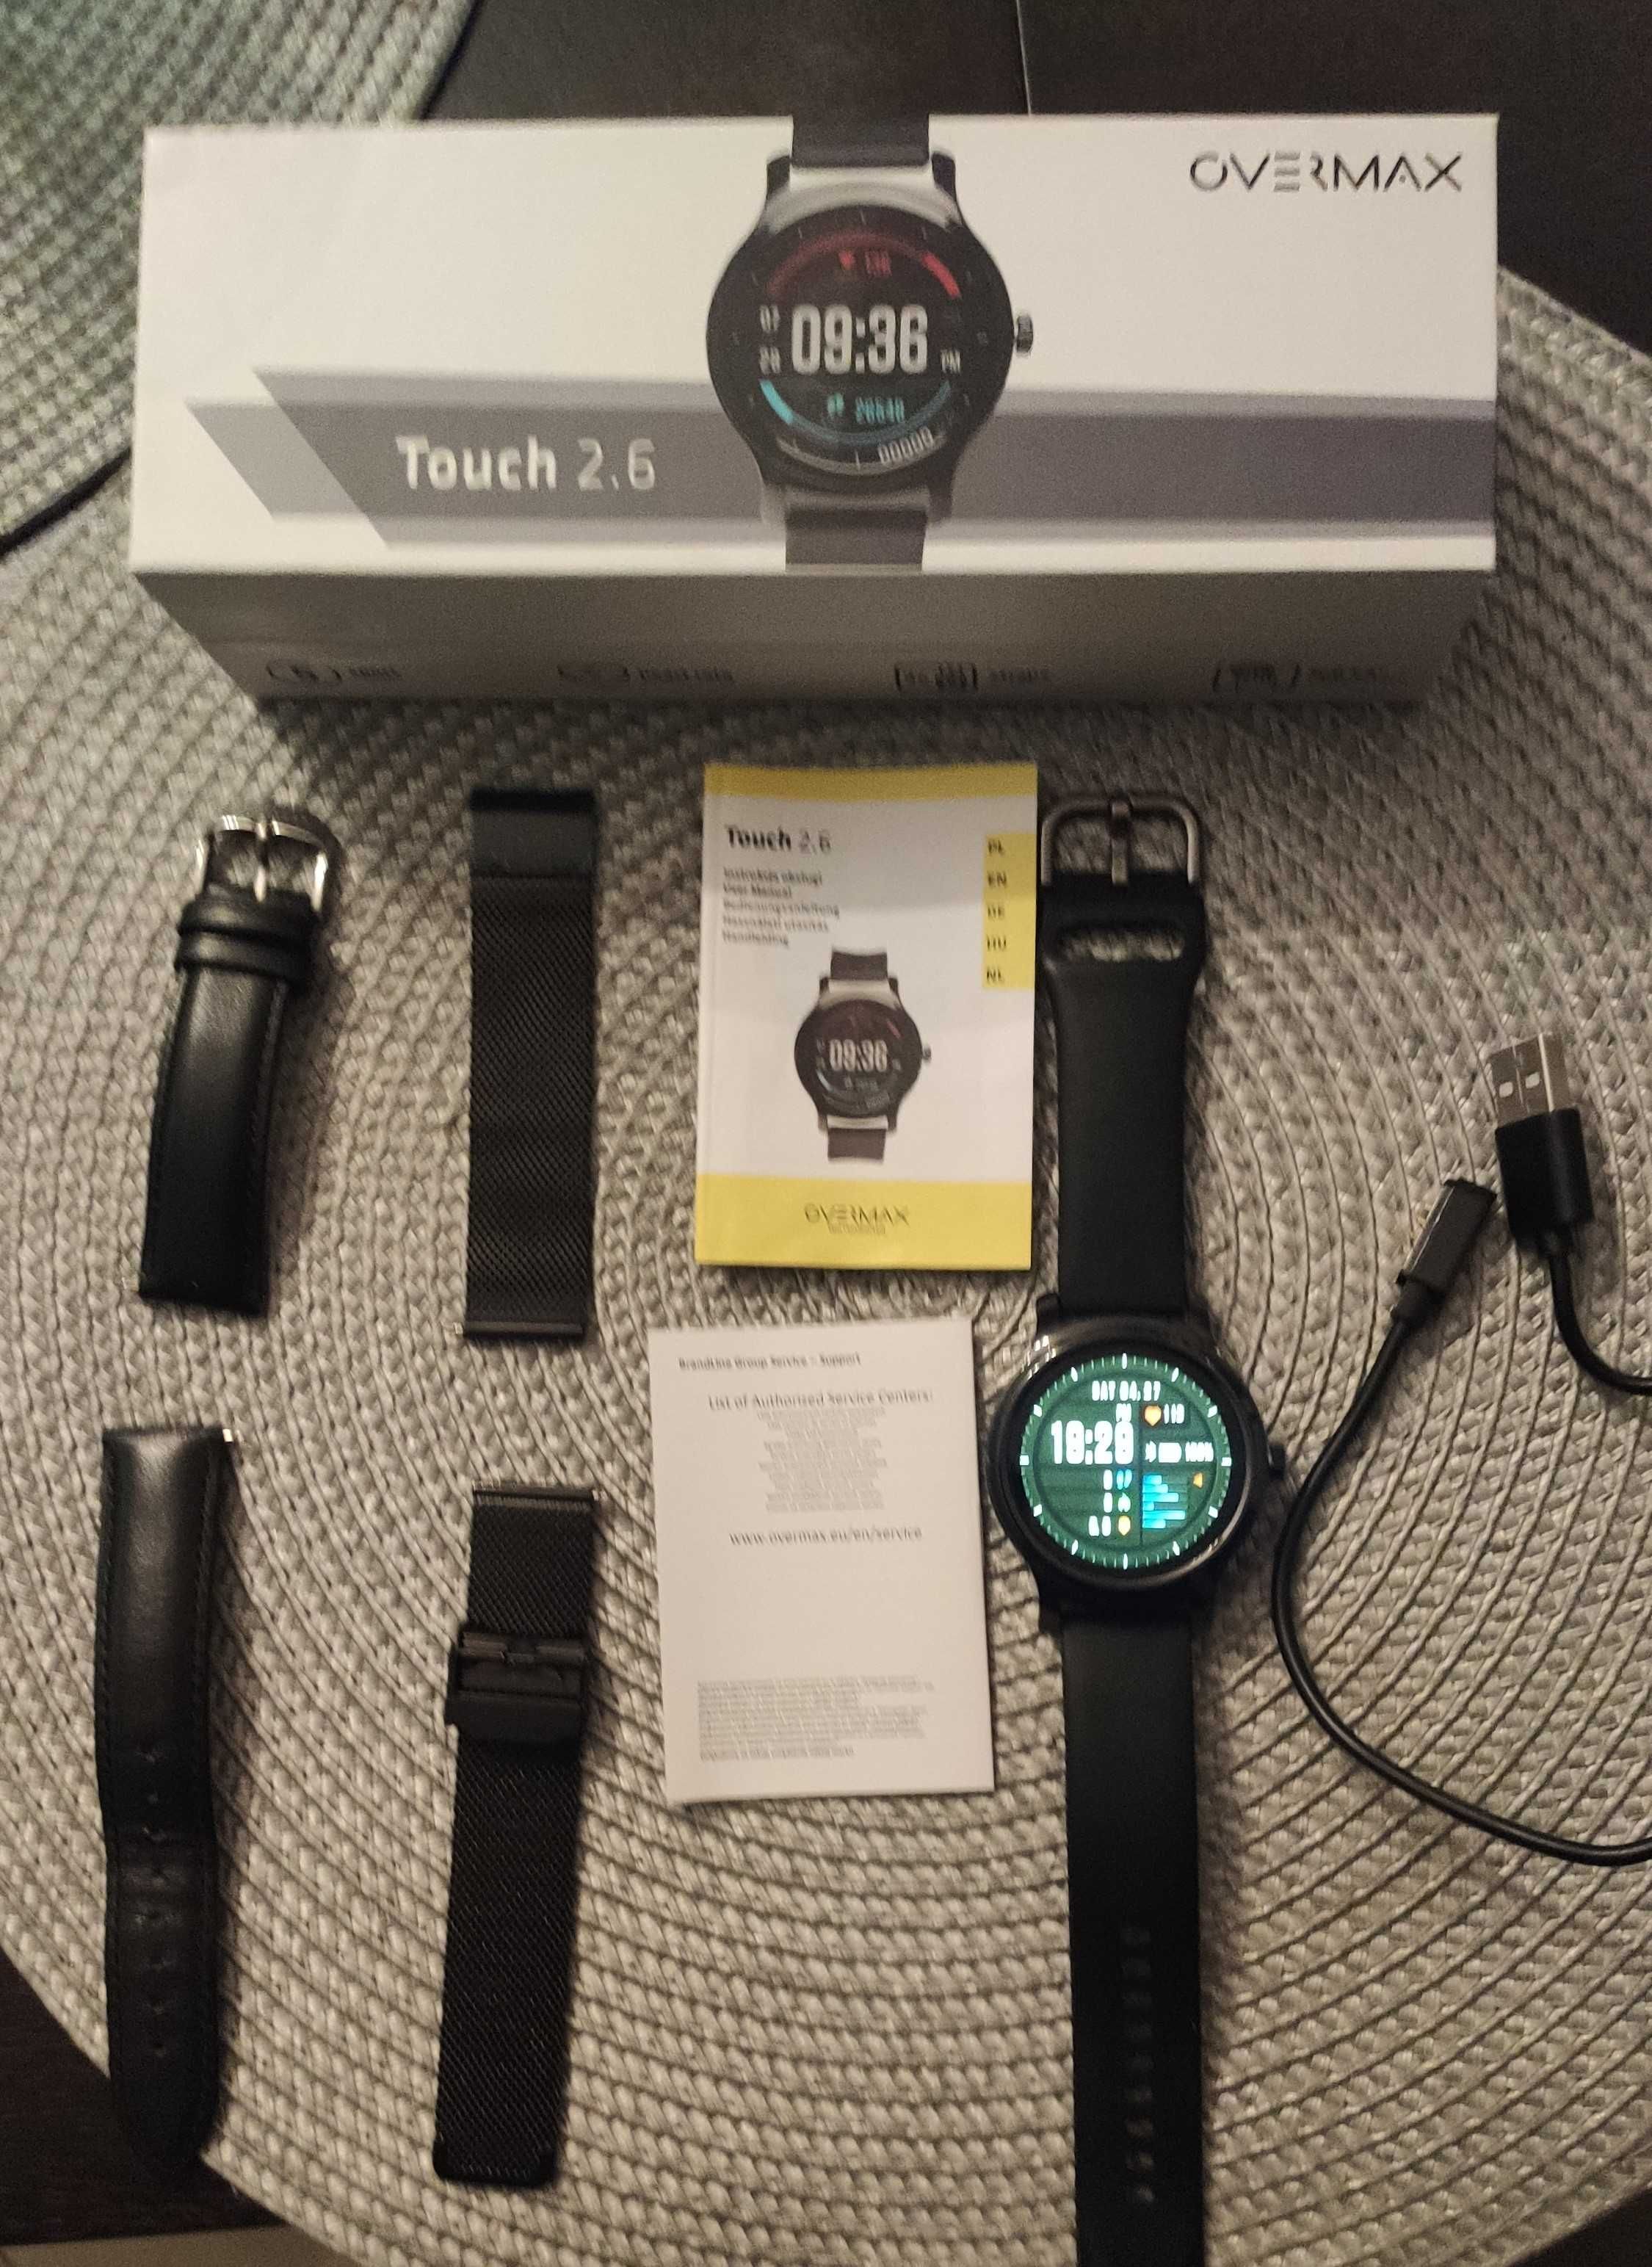 TANIO!! Smartwatch Overmax Touch 2.6